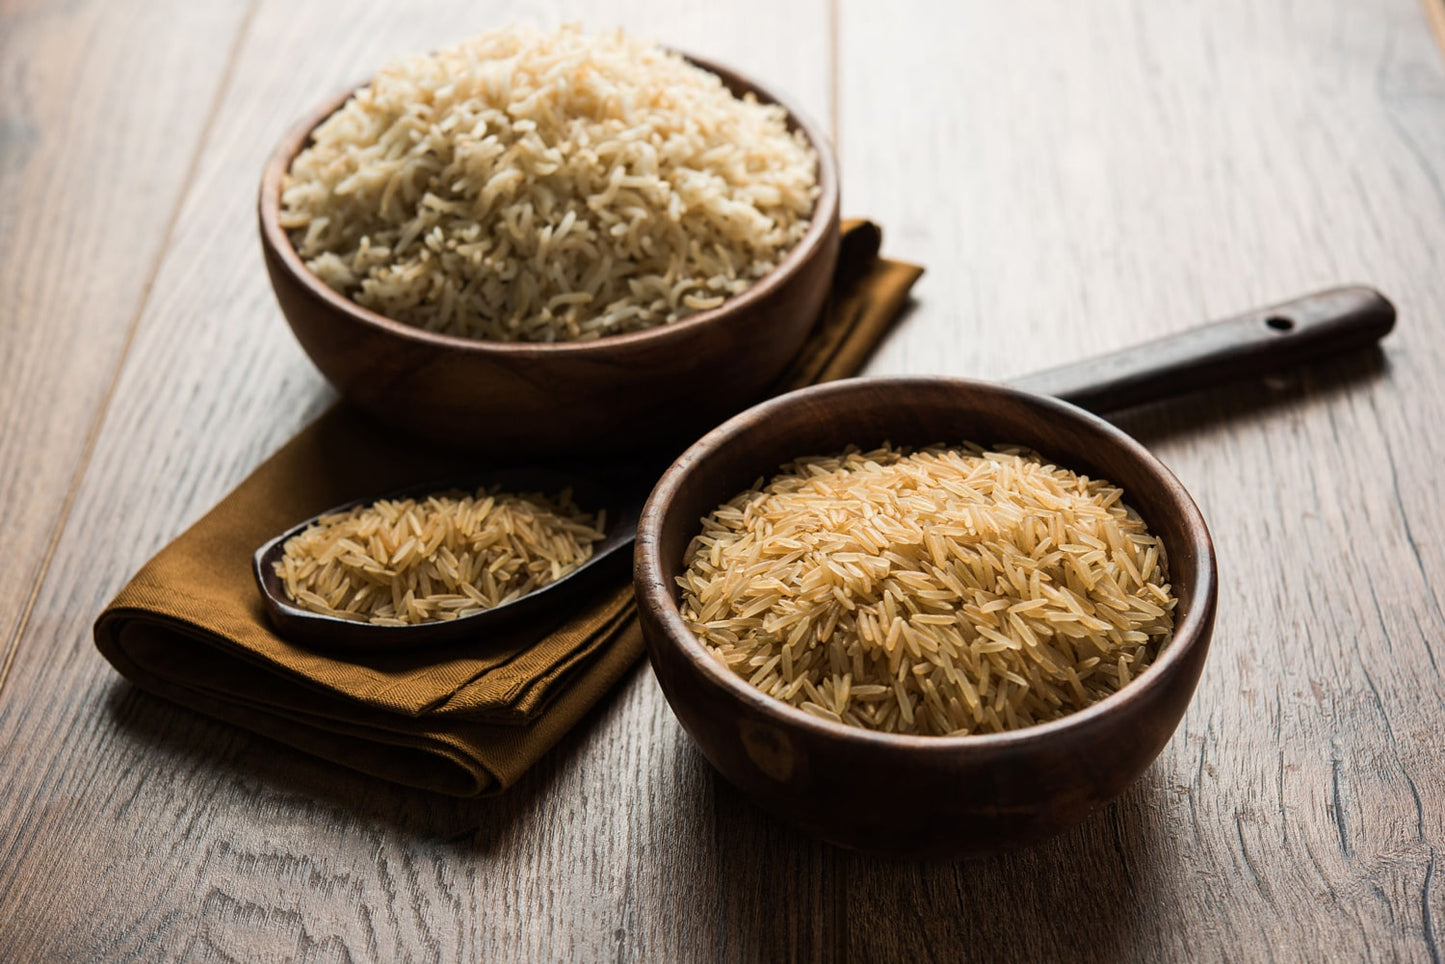 Brown Basmati Rice - Whole Dried Long-Grain Fragrant Rice, Kosher, Vegan, Less Starch Content. High in Dietary Fiber. Great for Making Stir-Fries, Curries and Pilafs. Bulk